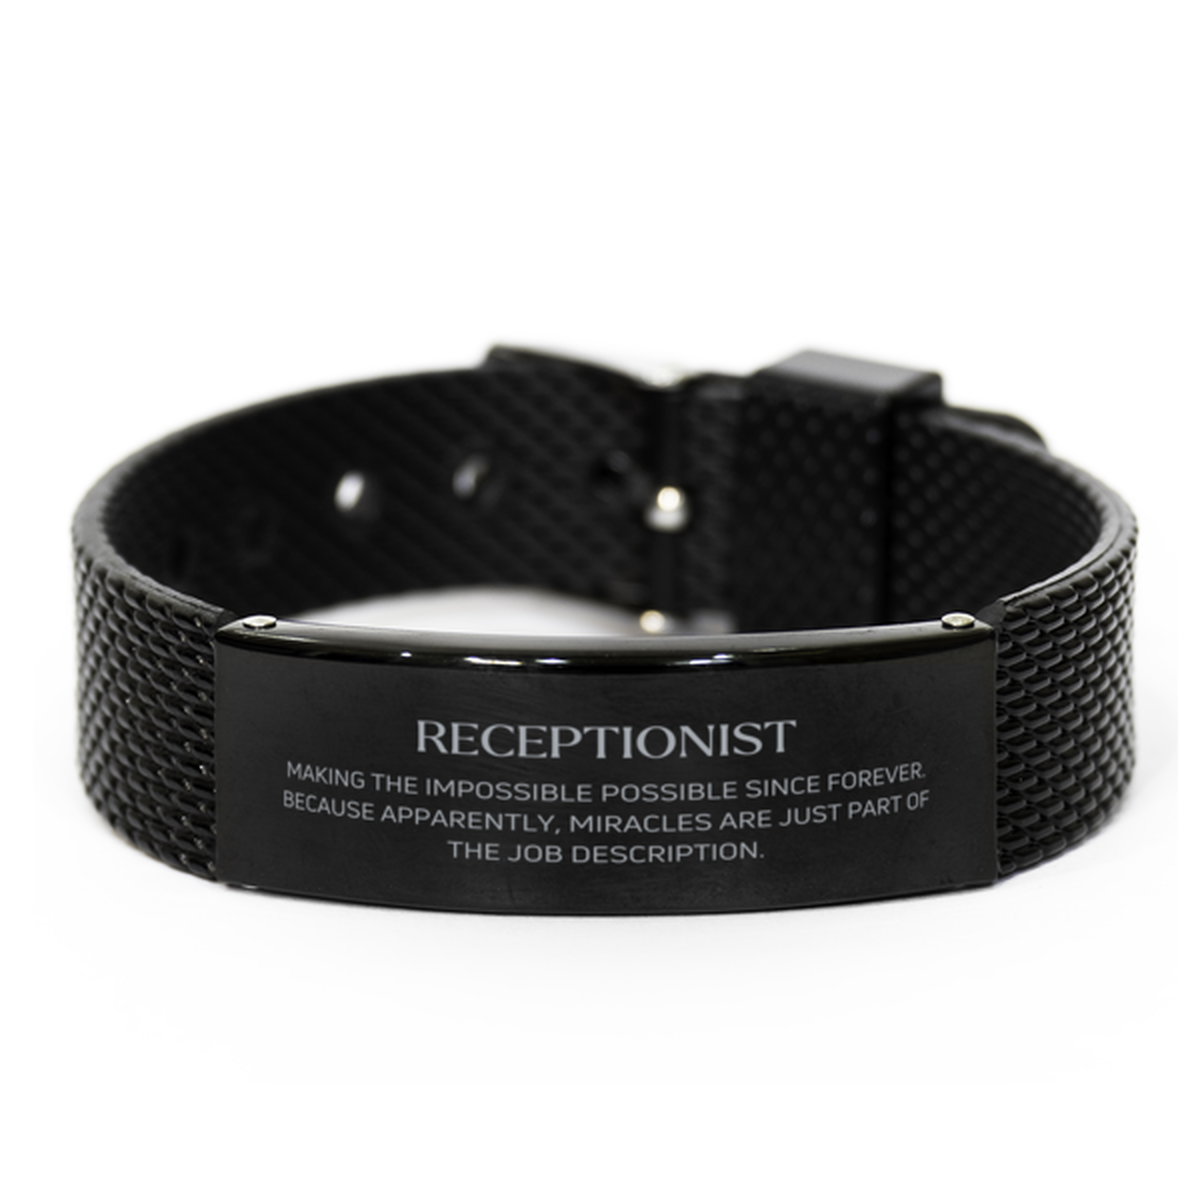 Funny Receptionist Gifts, Miracles are just part of the job description, Inspirational Birthday Black Shark Mesh Bracelet For Receptionist, Men, Women, Coworkers, Friends, Boss